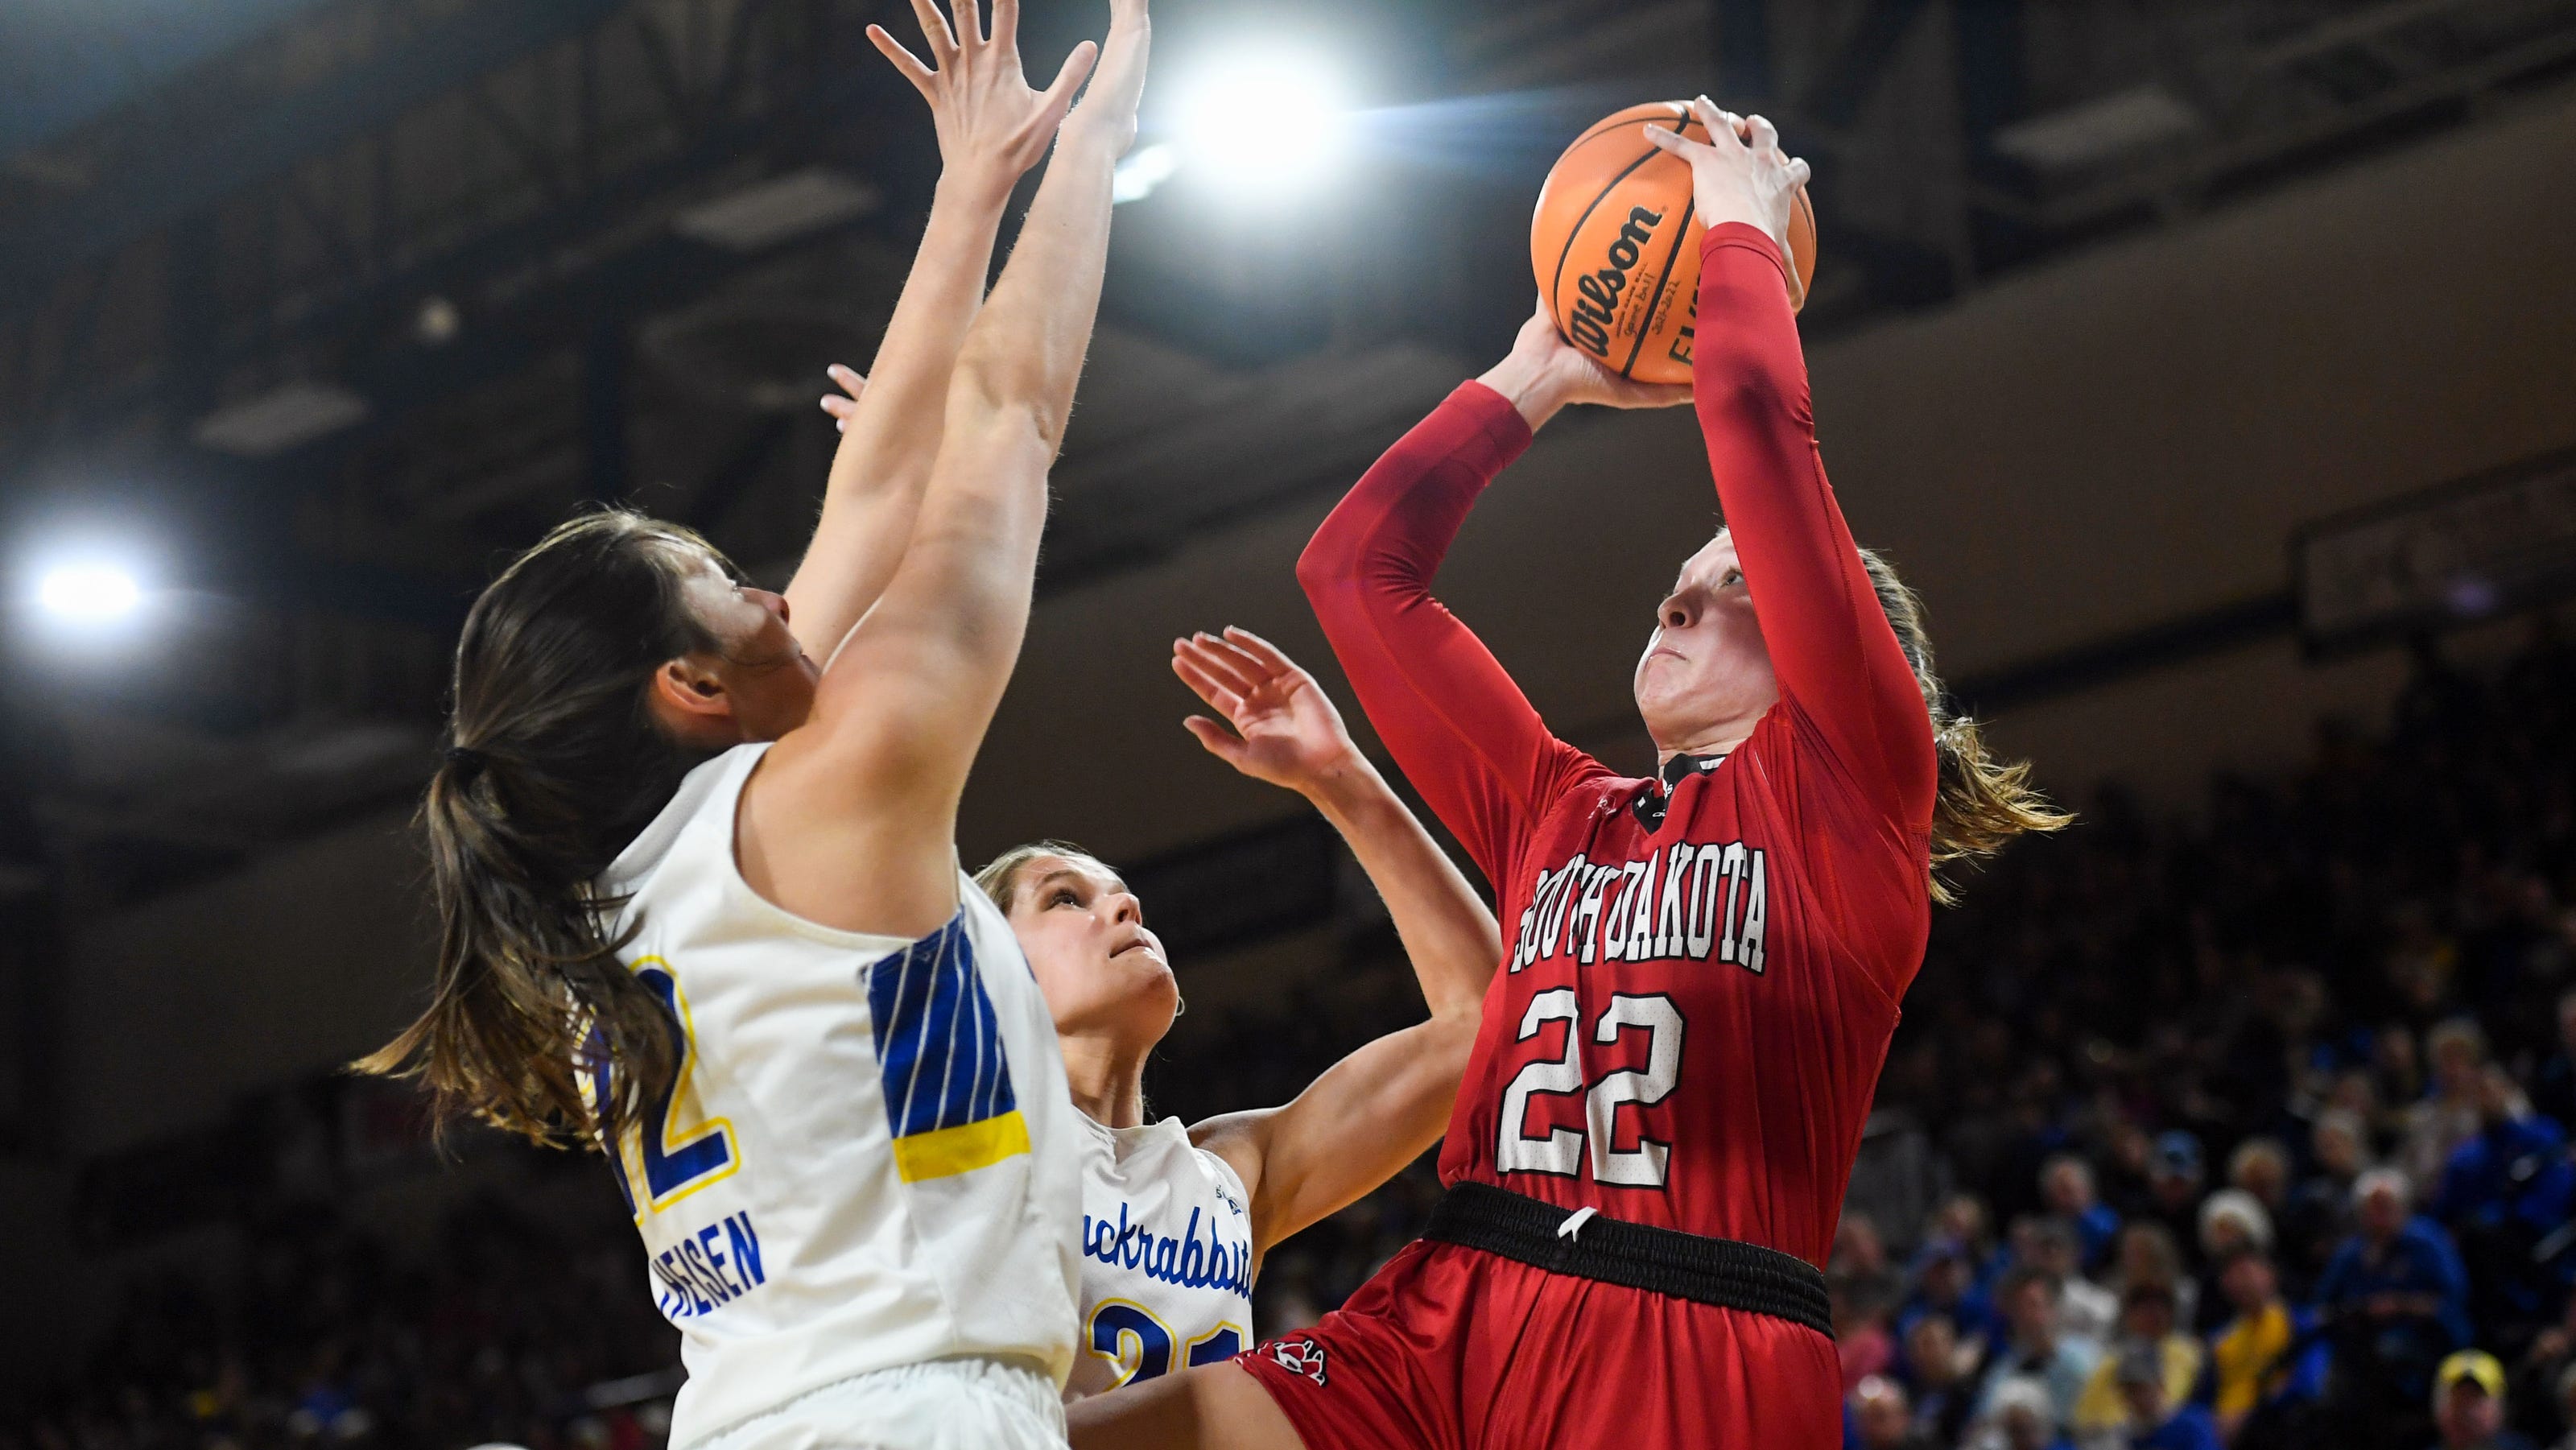 5 players to watch in the Summit League women's basketball tournament